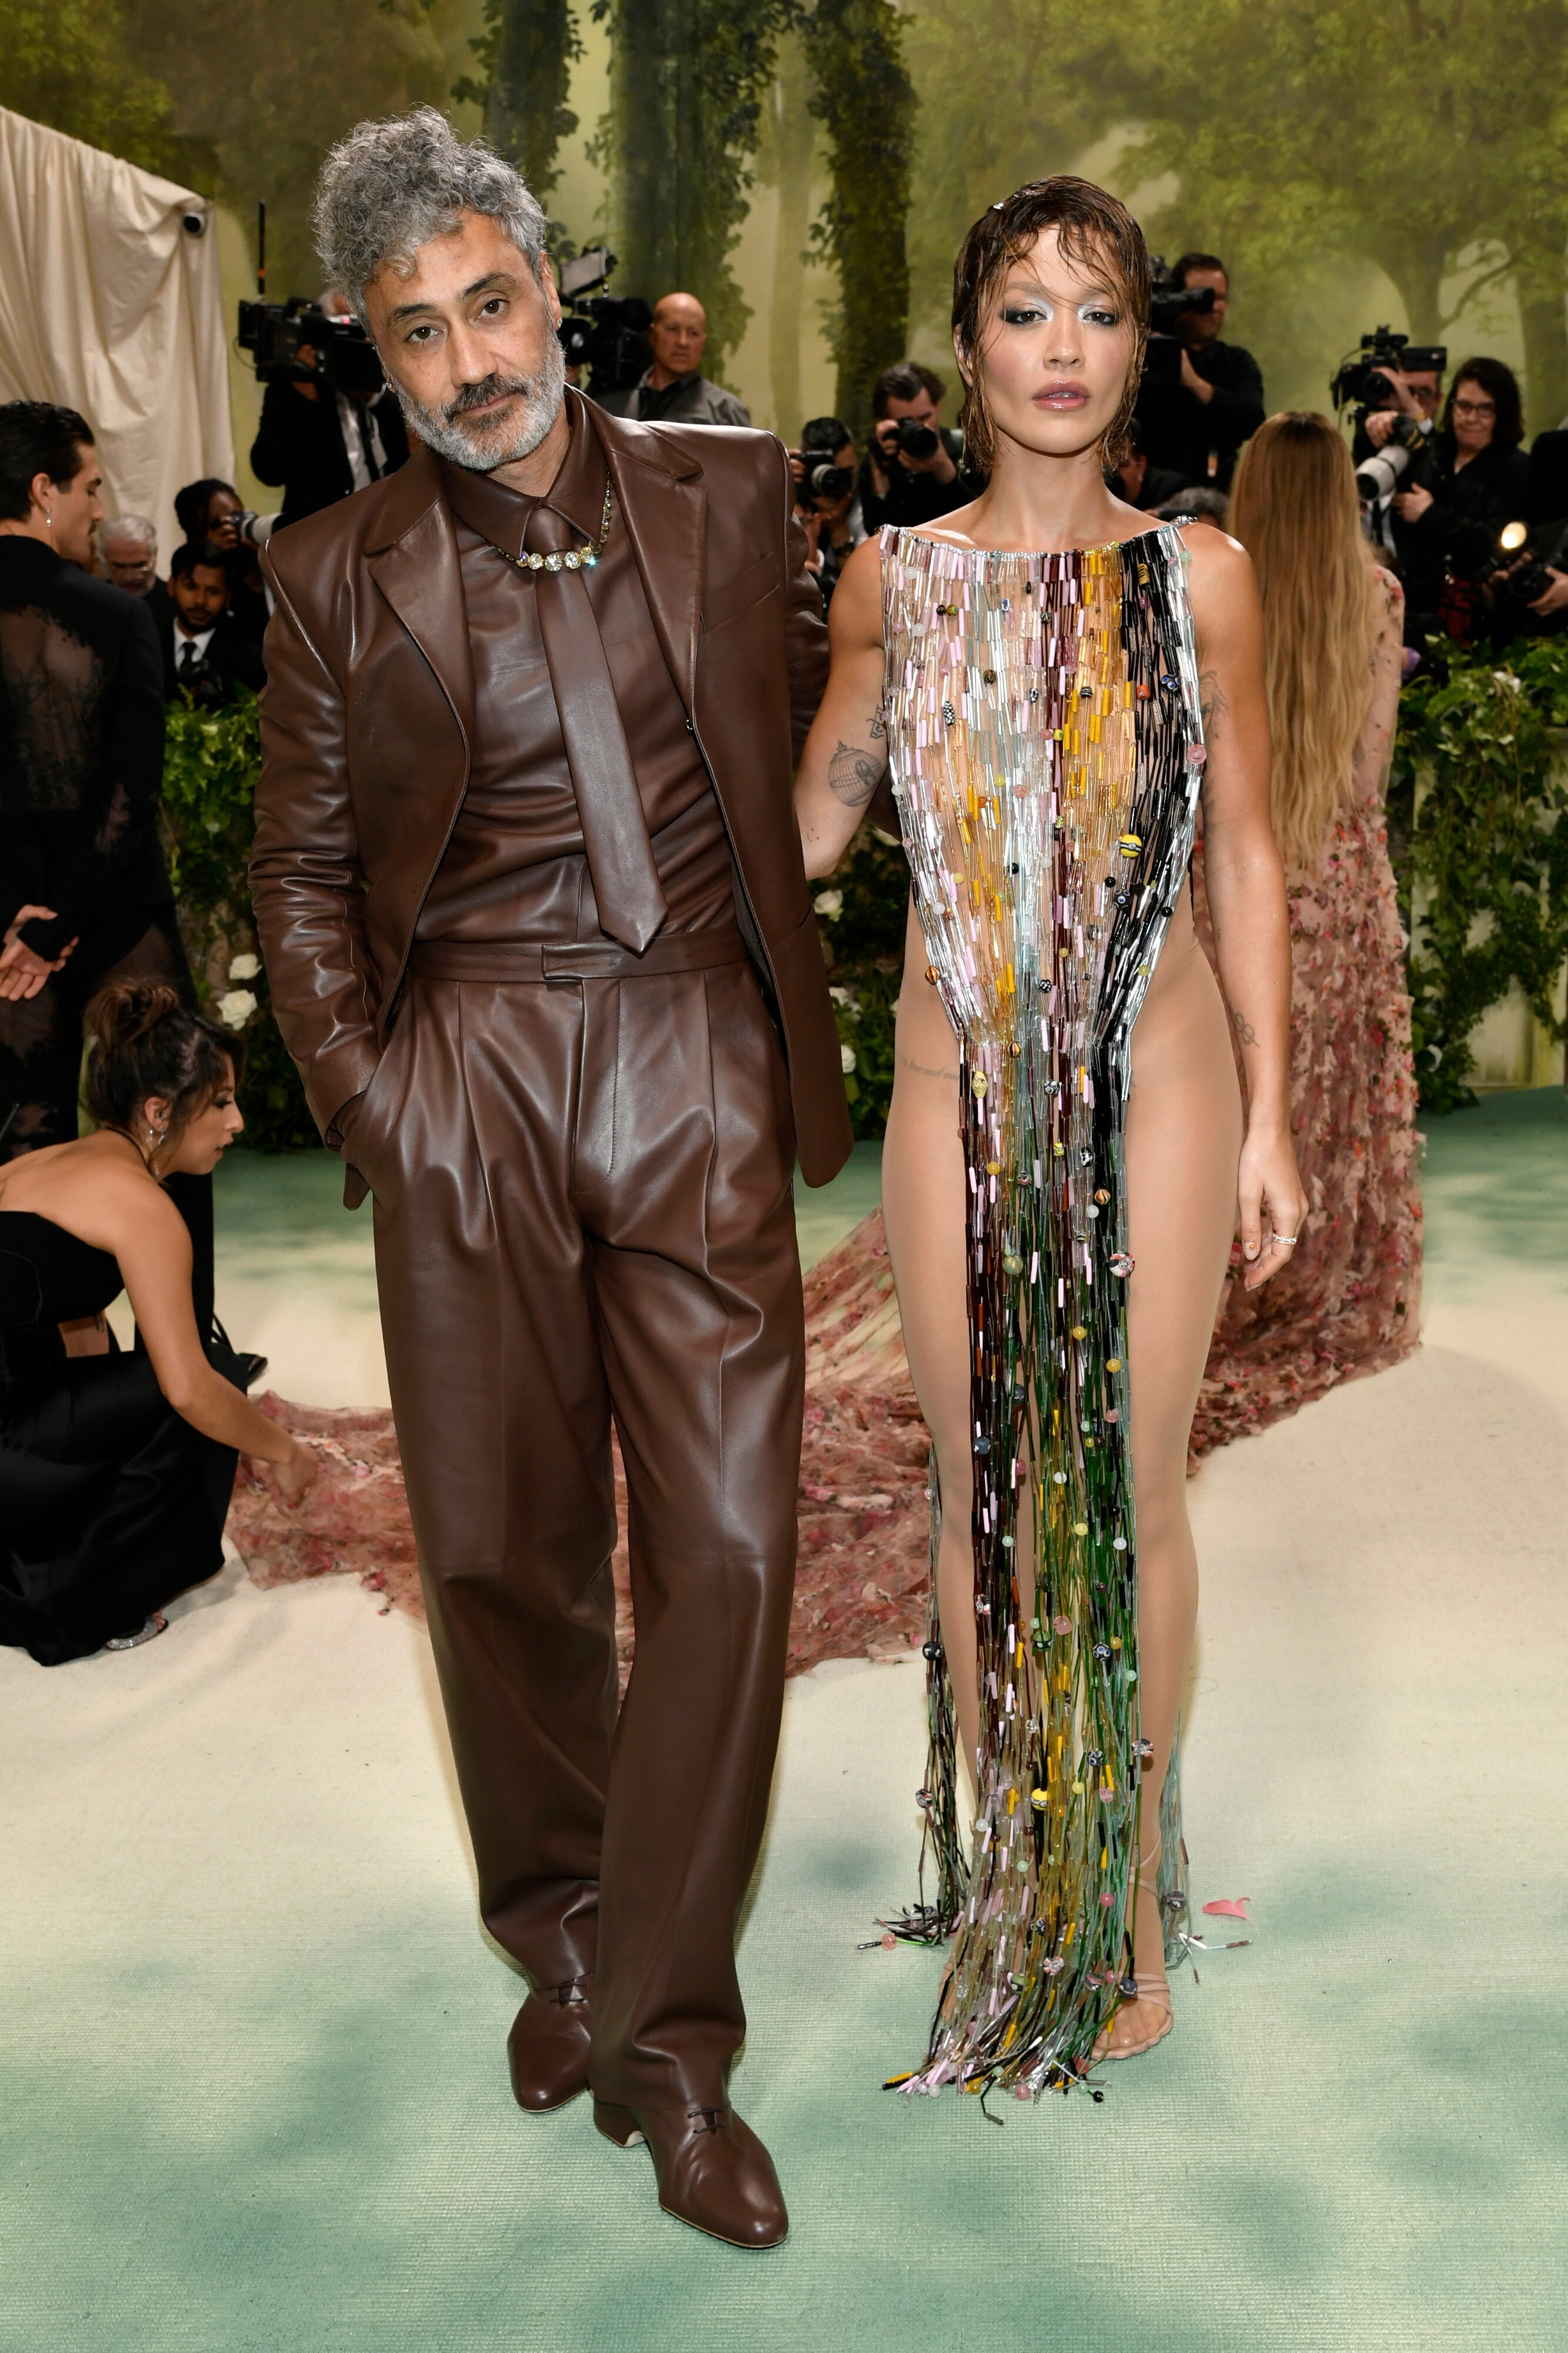 Taika Waititi wears a brown leather suit with a matching tie and Rita Ora in a dress made from a curtain of coloured beads